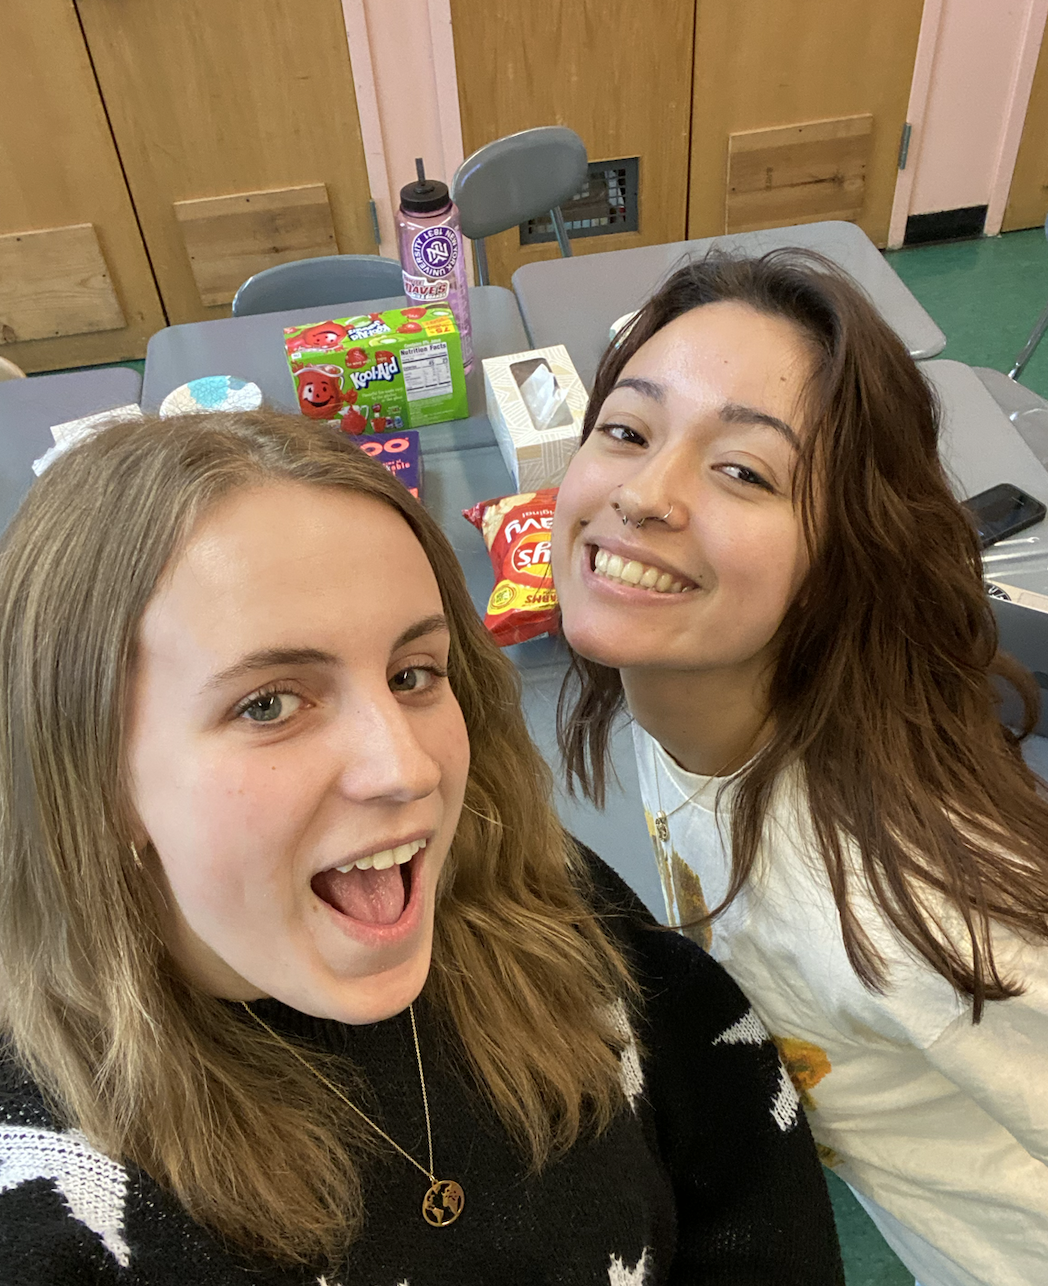 Two female-presenting NYU Social Work majors smile in front of a table with snacks on it.